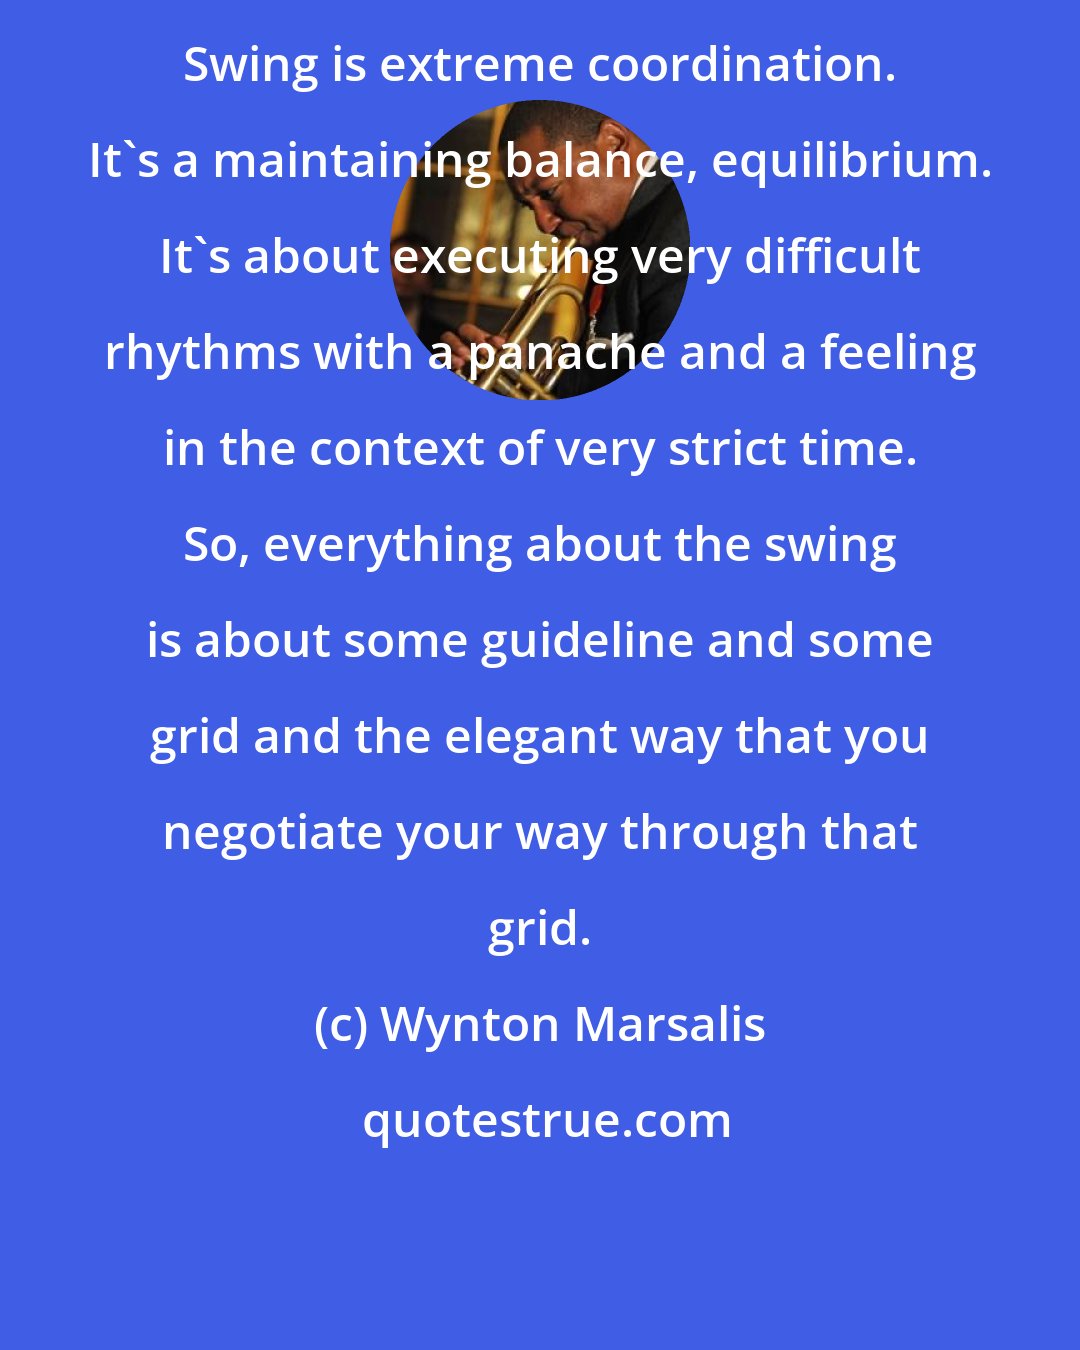 Wynton Marsalis: Swing is extreme coordination. It's a maintaining balance, equilibrium. It's about executing very difficult rhythms with a panache and a feeling in the context of very strict time. So, everything about the swing is about some guideline and some grid and the elegant way that you negotiate your way through that grid.